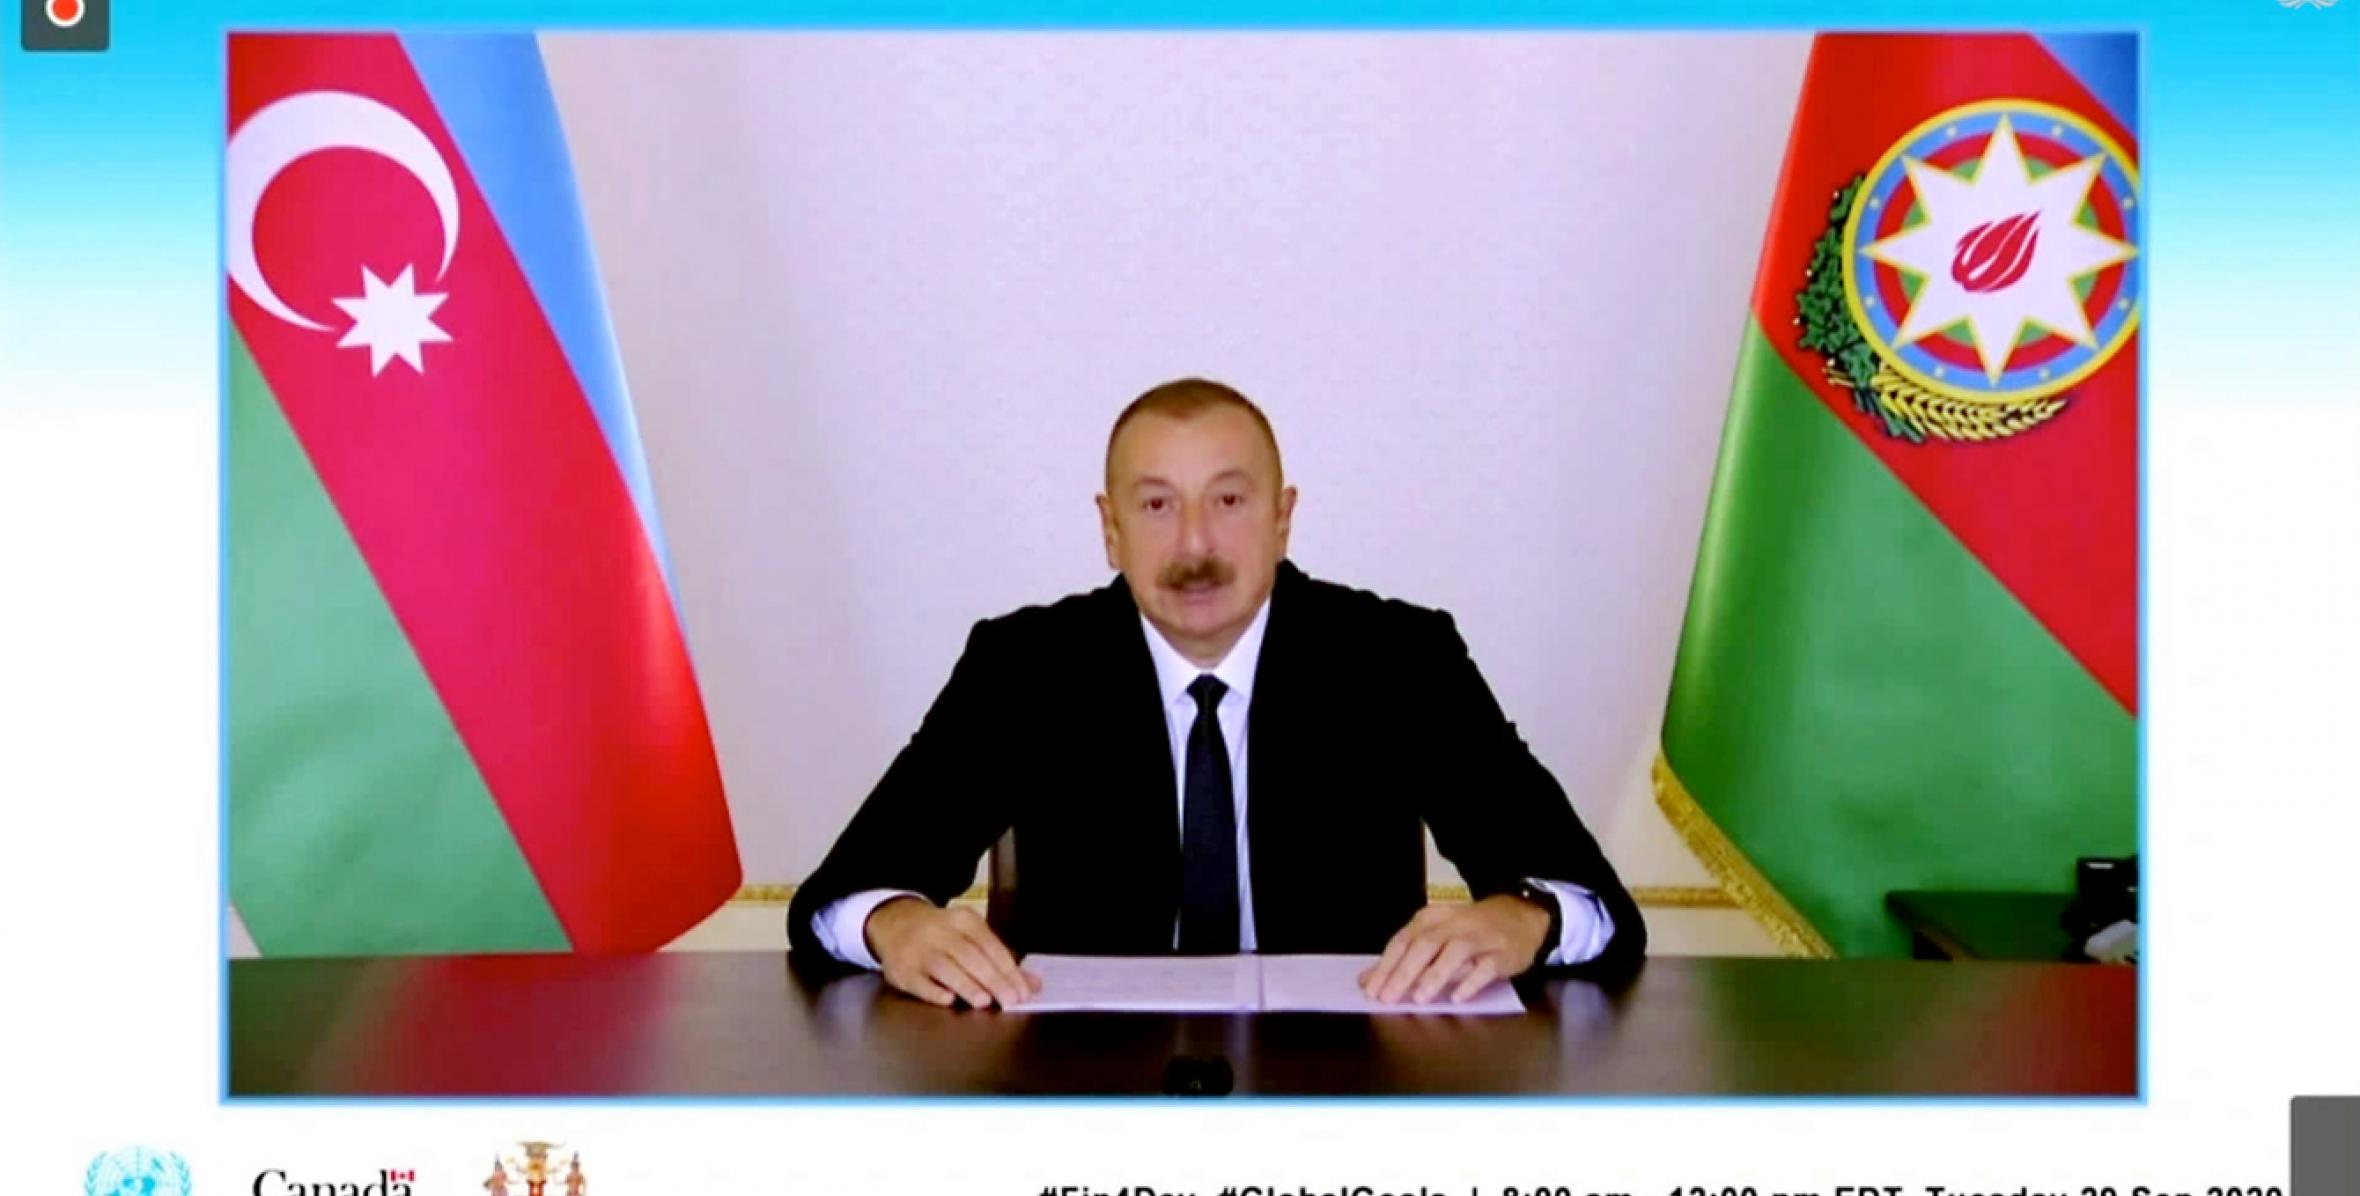 Speech by Ilham Aliyev at a meeting of Heads of State and Government on “Financing the 2030 Agenda for Sustainable Development in the Era of COVID-19 and Beyond”